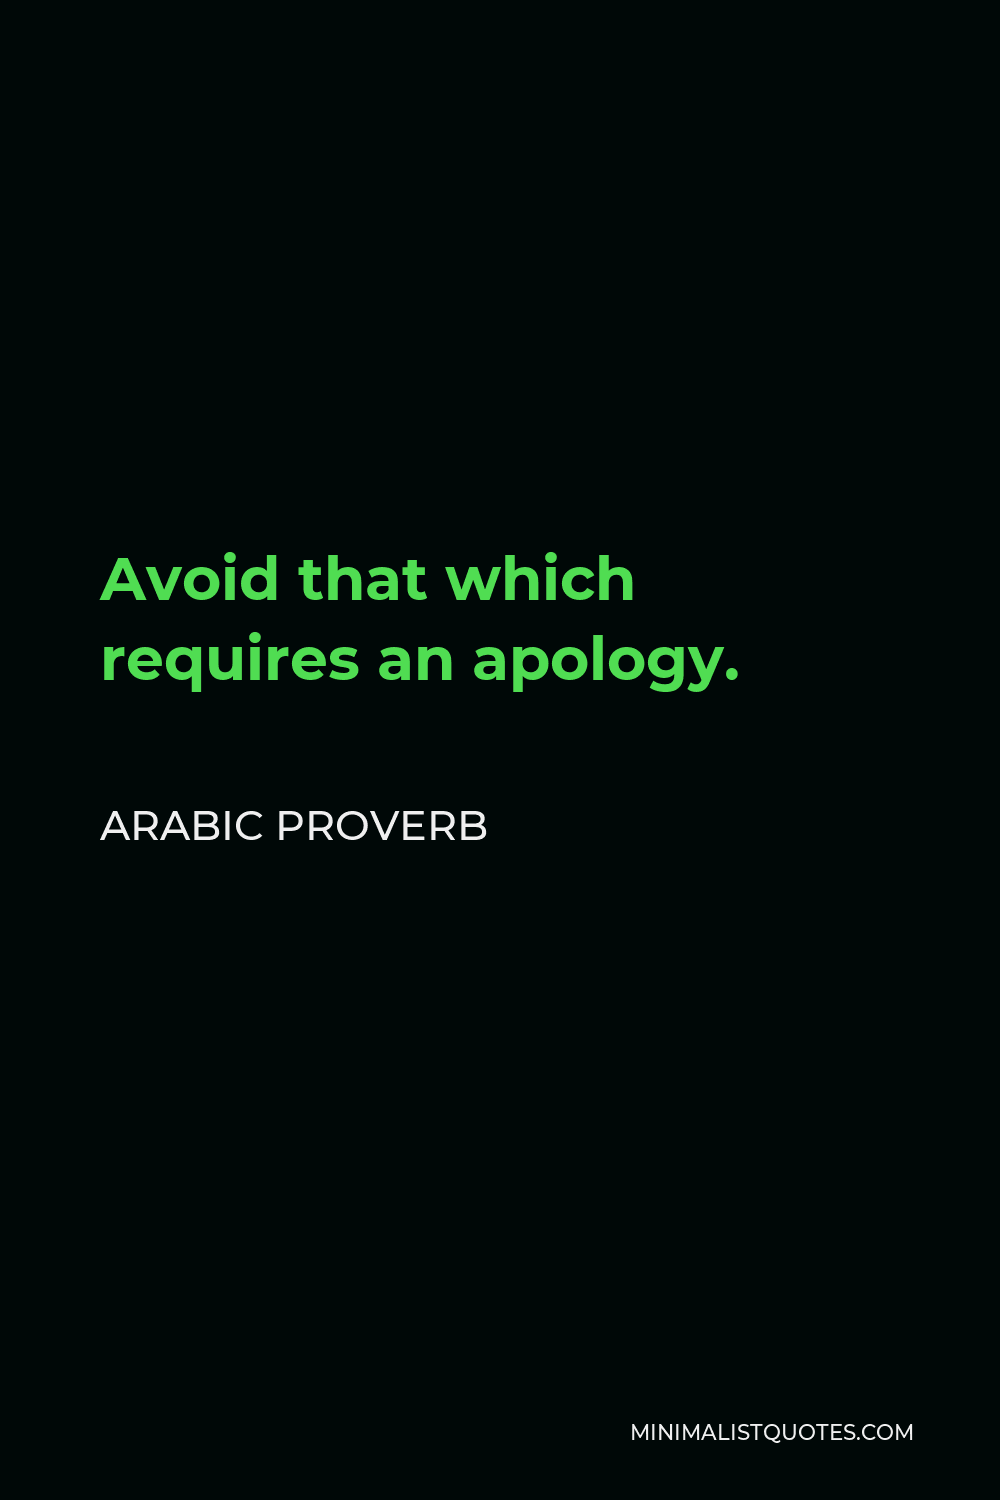 Arabic Proverb Quote - Avoid that which requires an apology.